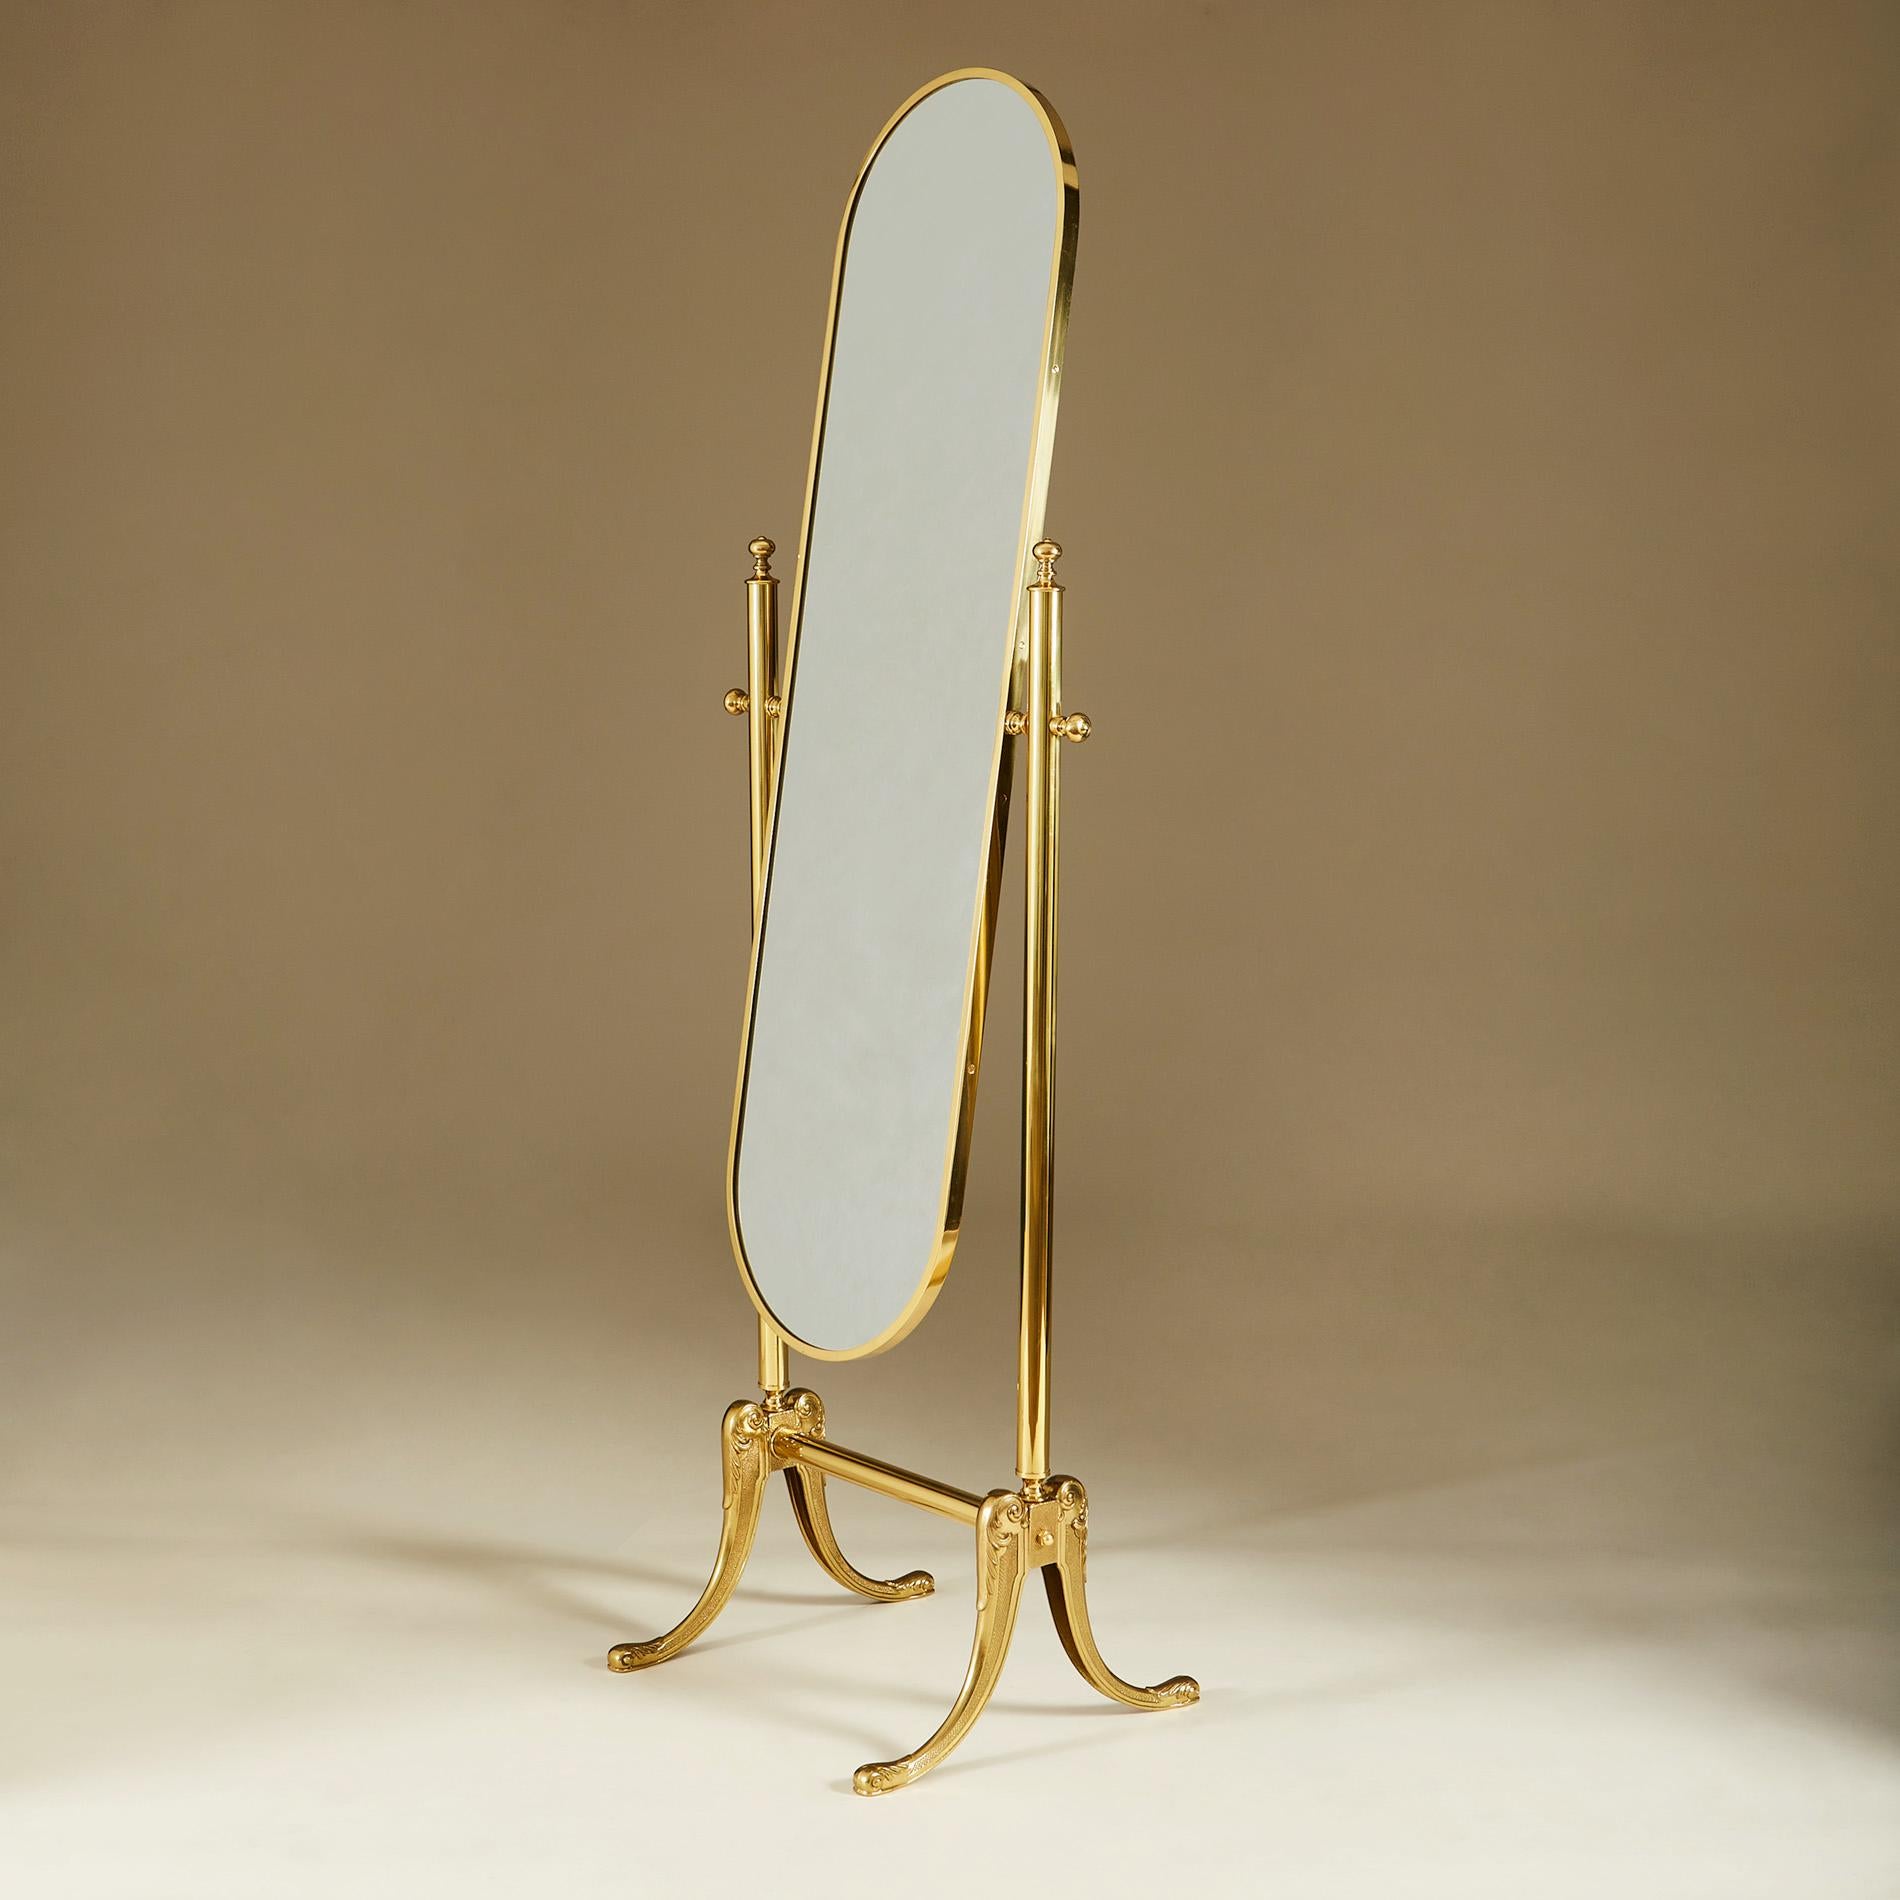 Brass full-length adjustable bevelled glass mirror with intricately-detailed cast brass splayed legs (see detailed image). Backed with green baize.